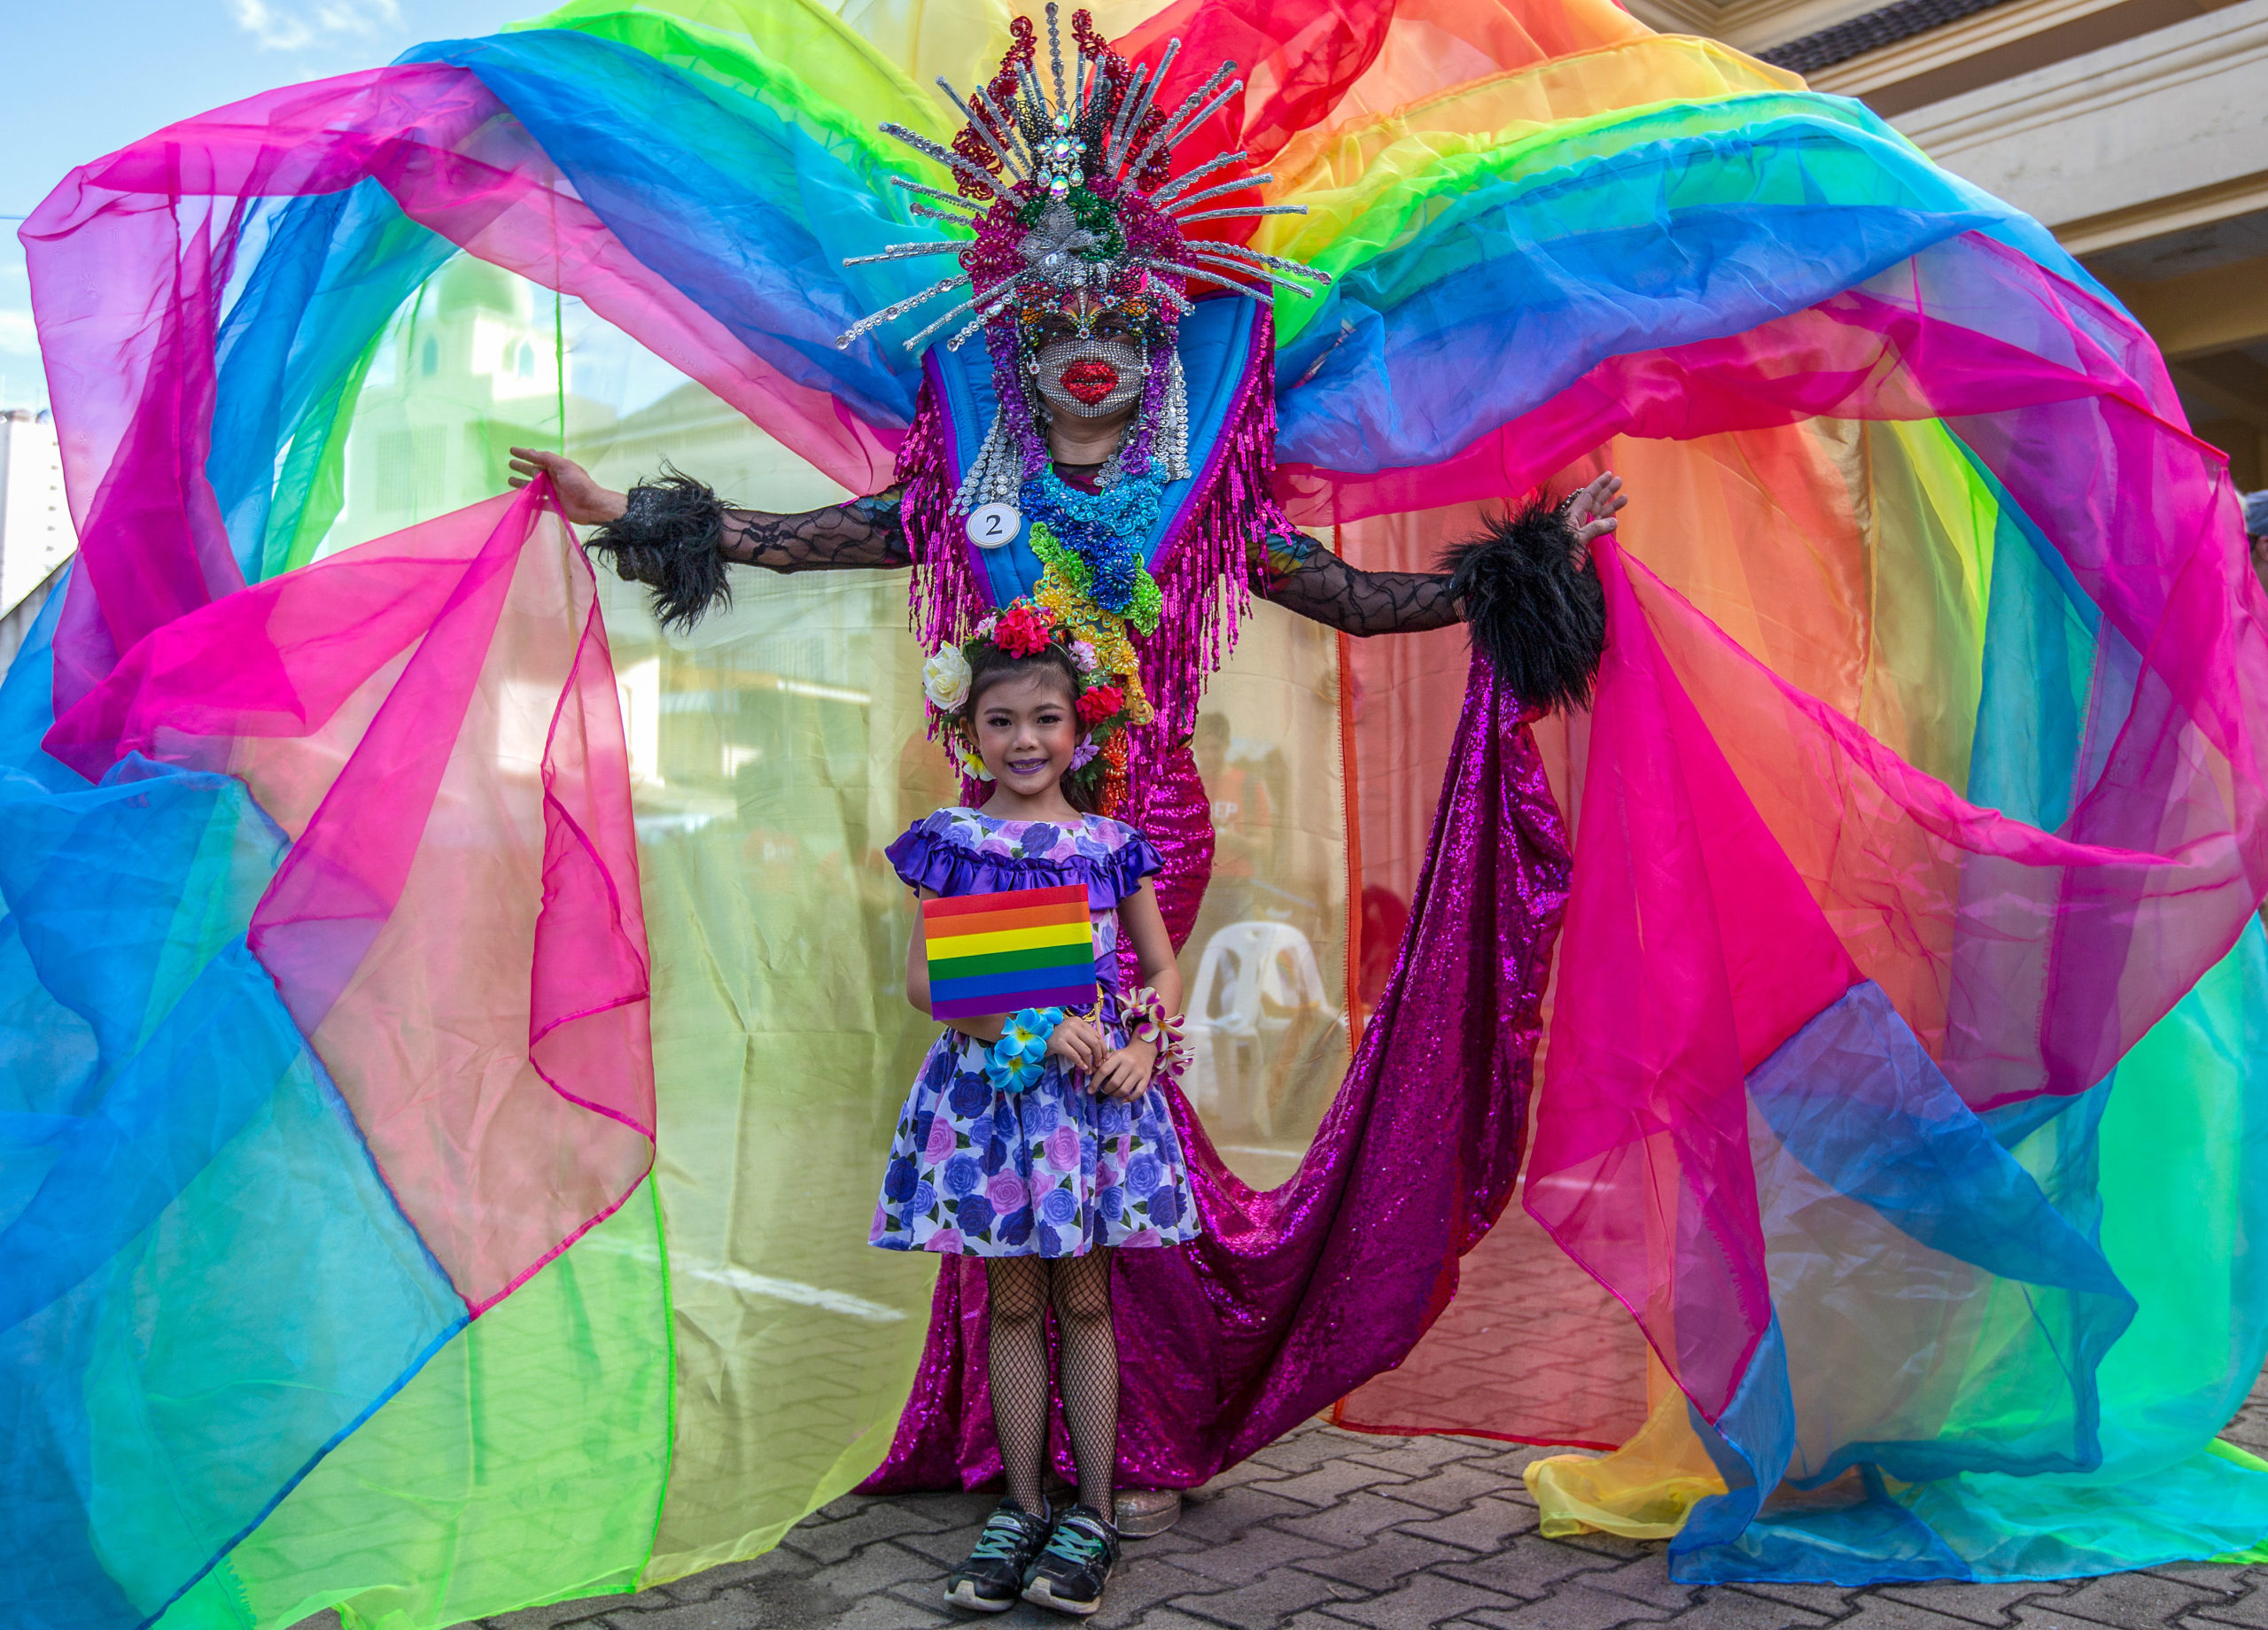 An activist in a rainbow costume and a kid are posing for